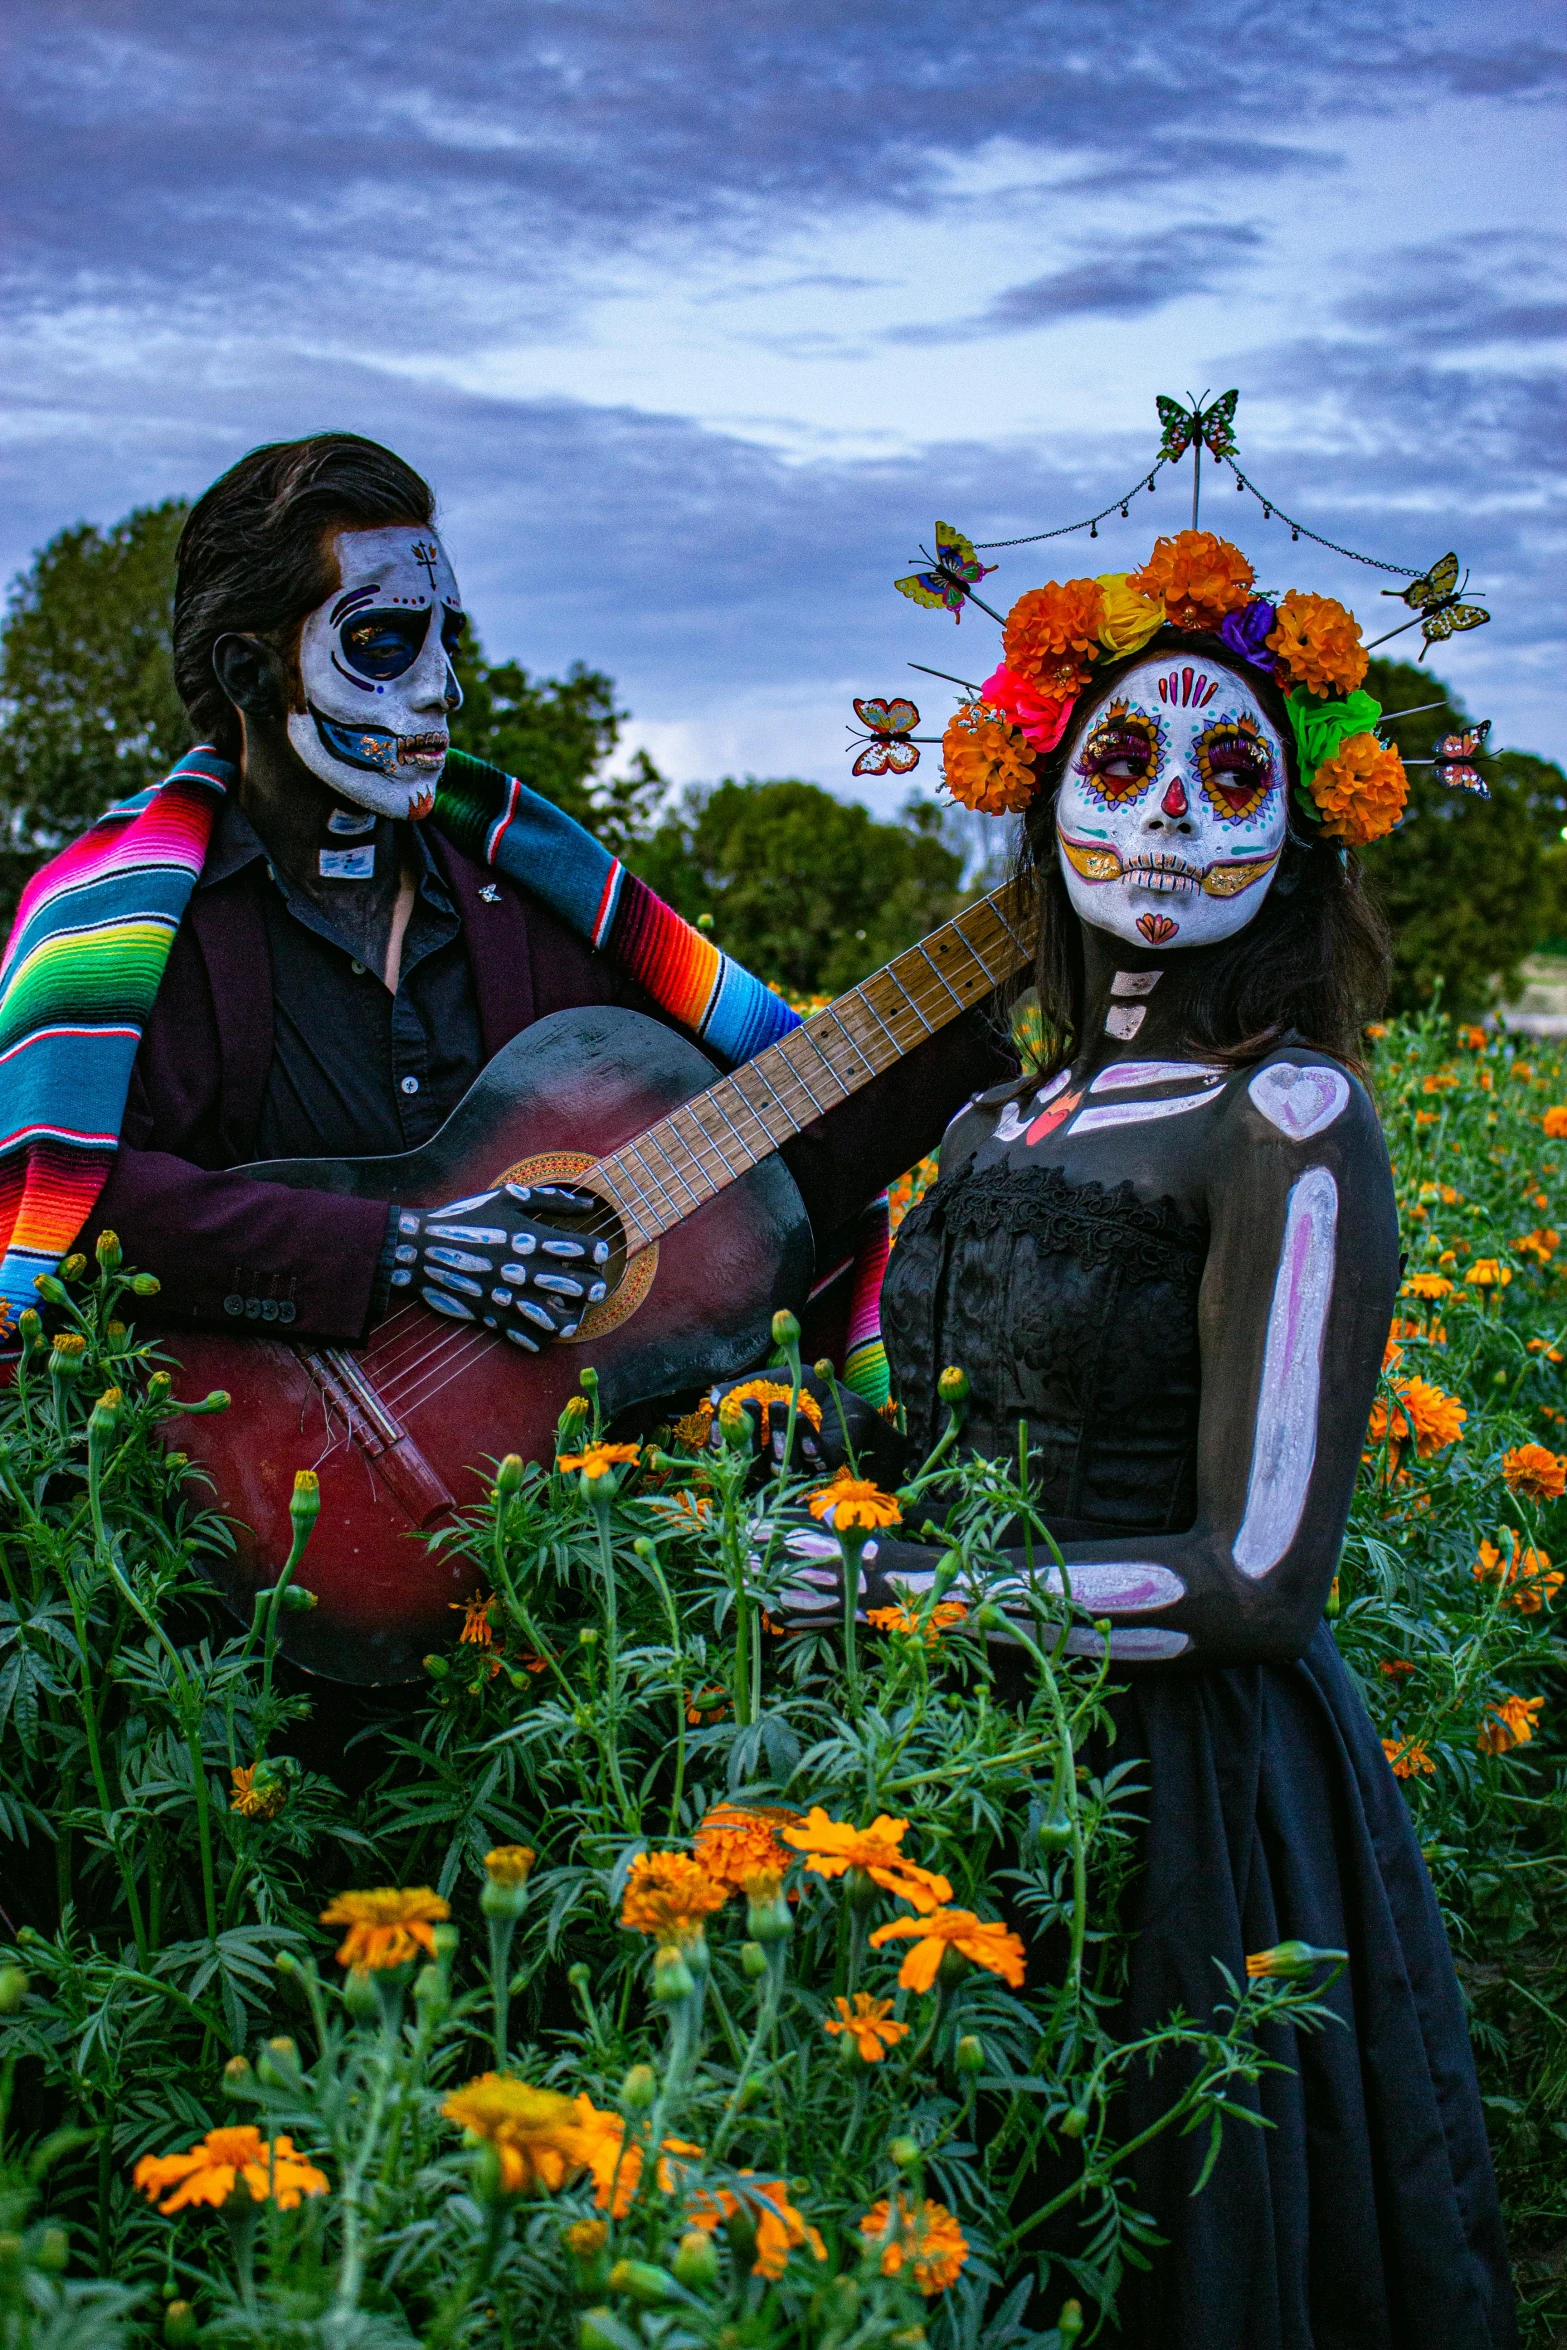 couple in skeletons costumes holding an acoustic guitar outdoors